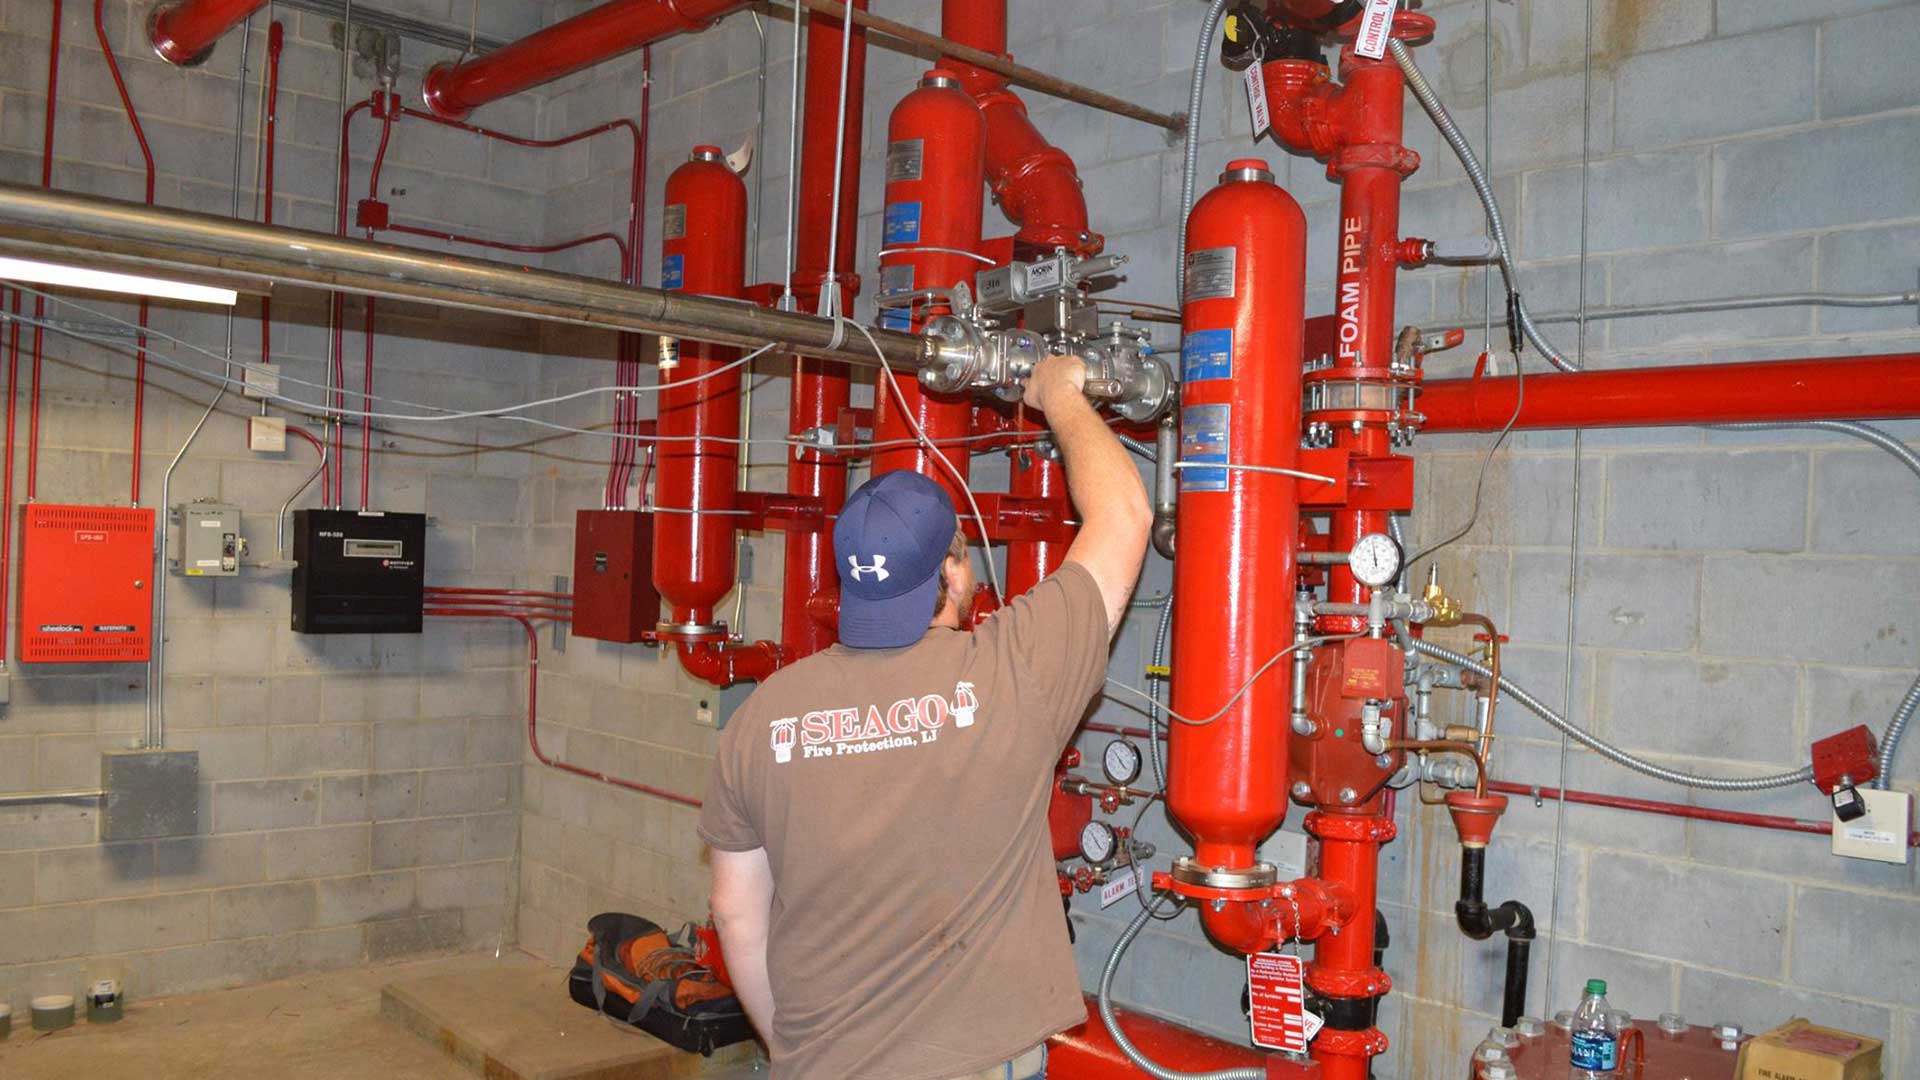 Seago Fire Protection LLC Fire Protection, Fire Sprinkler Services and Fire Sprinkler Installation